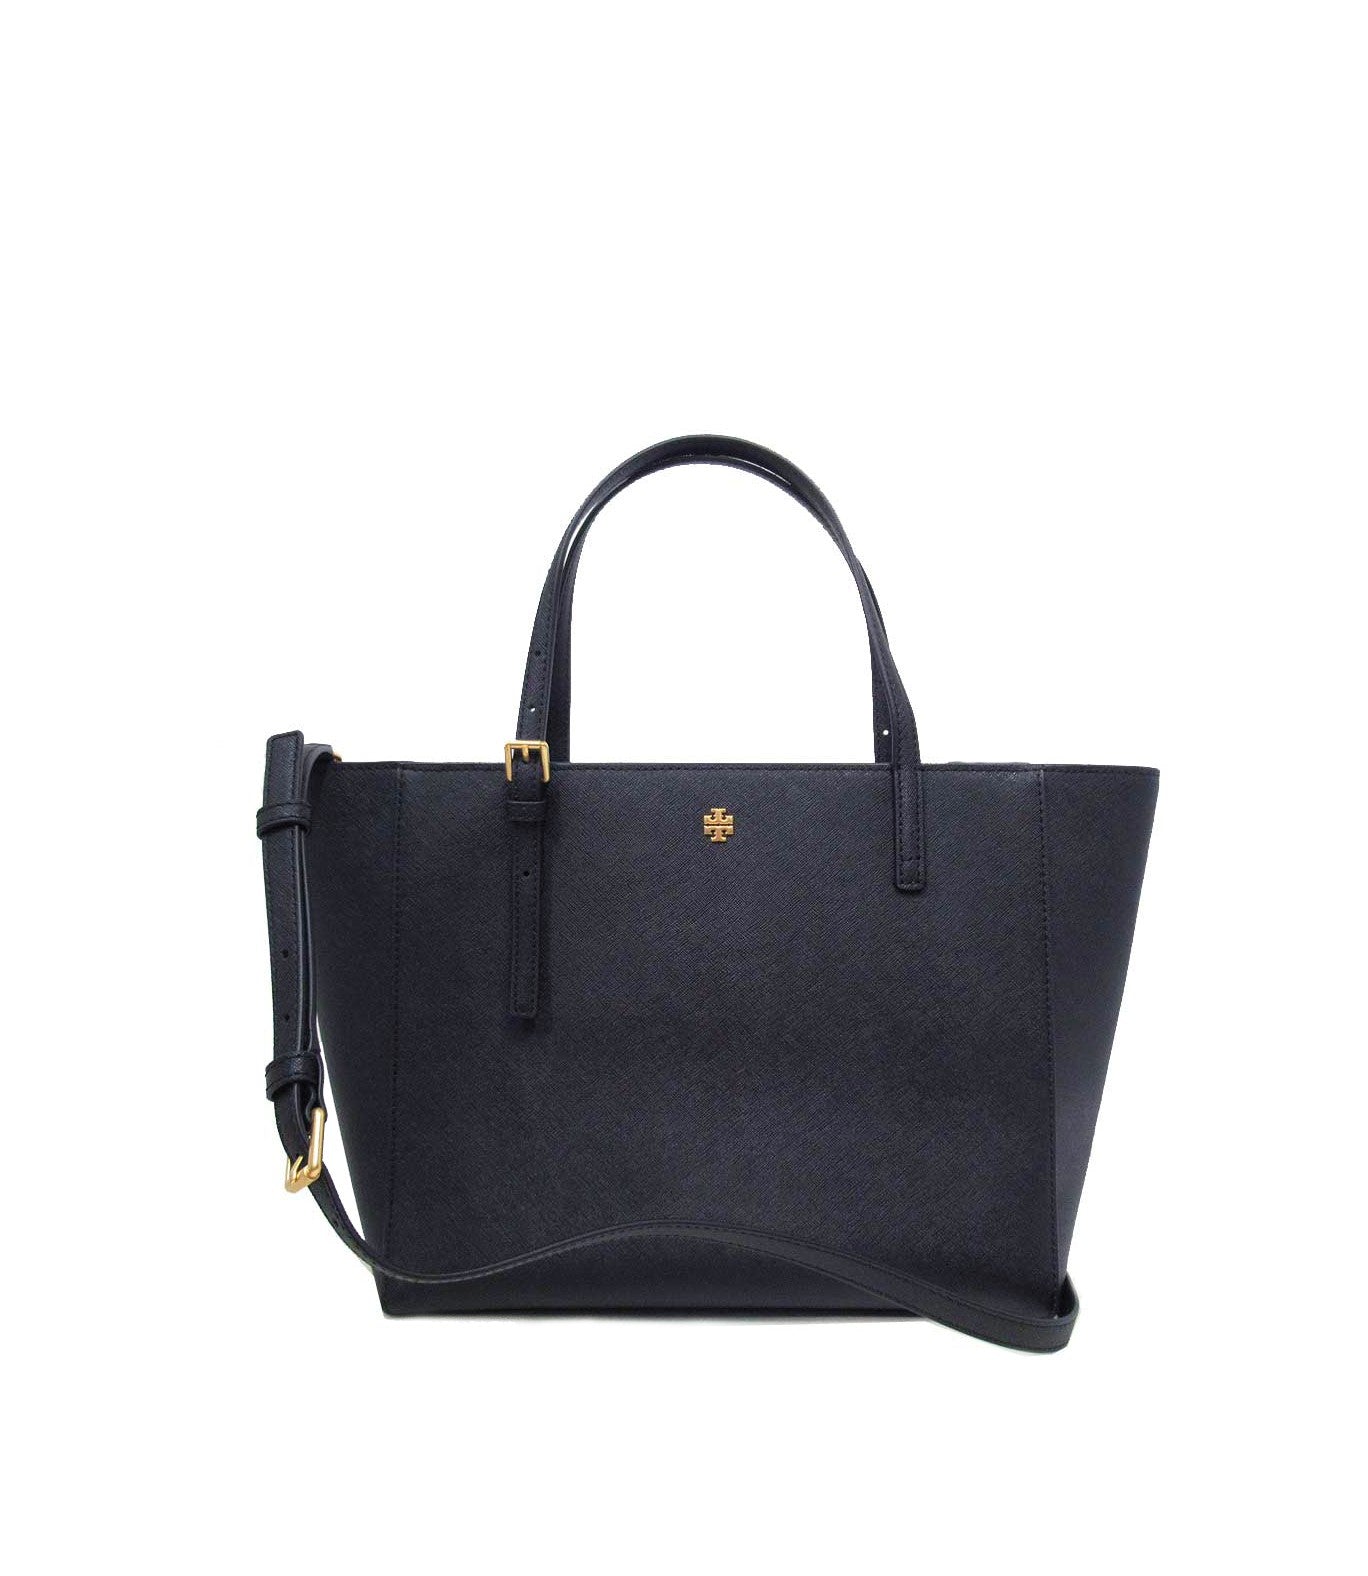 title:Tory Burch Tory Navy Emerson Small Tote;color:Tory Navy